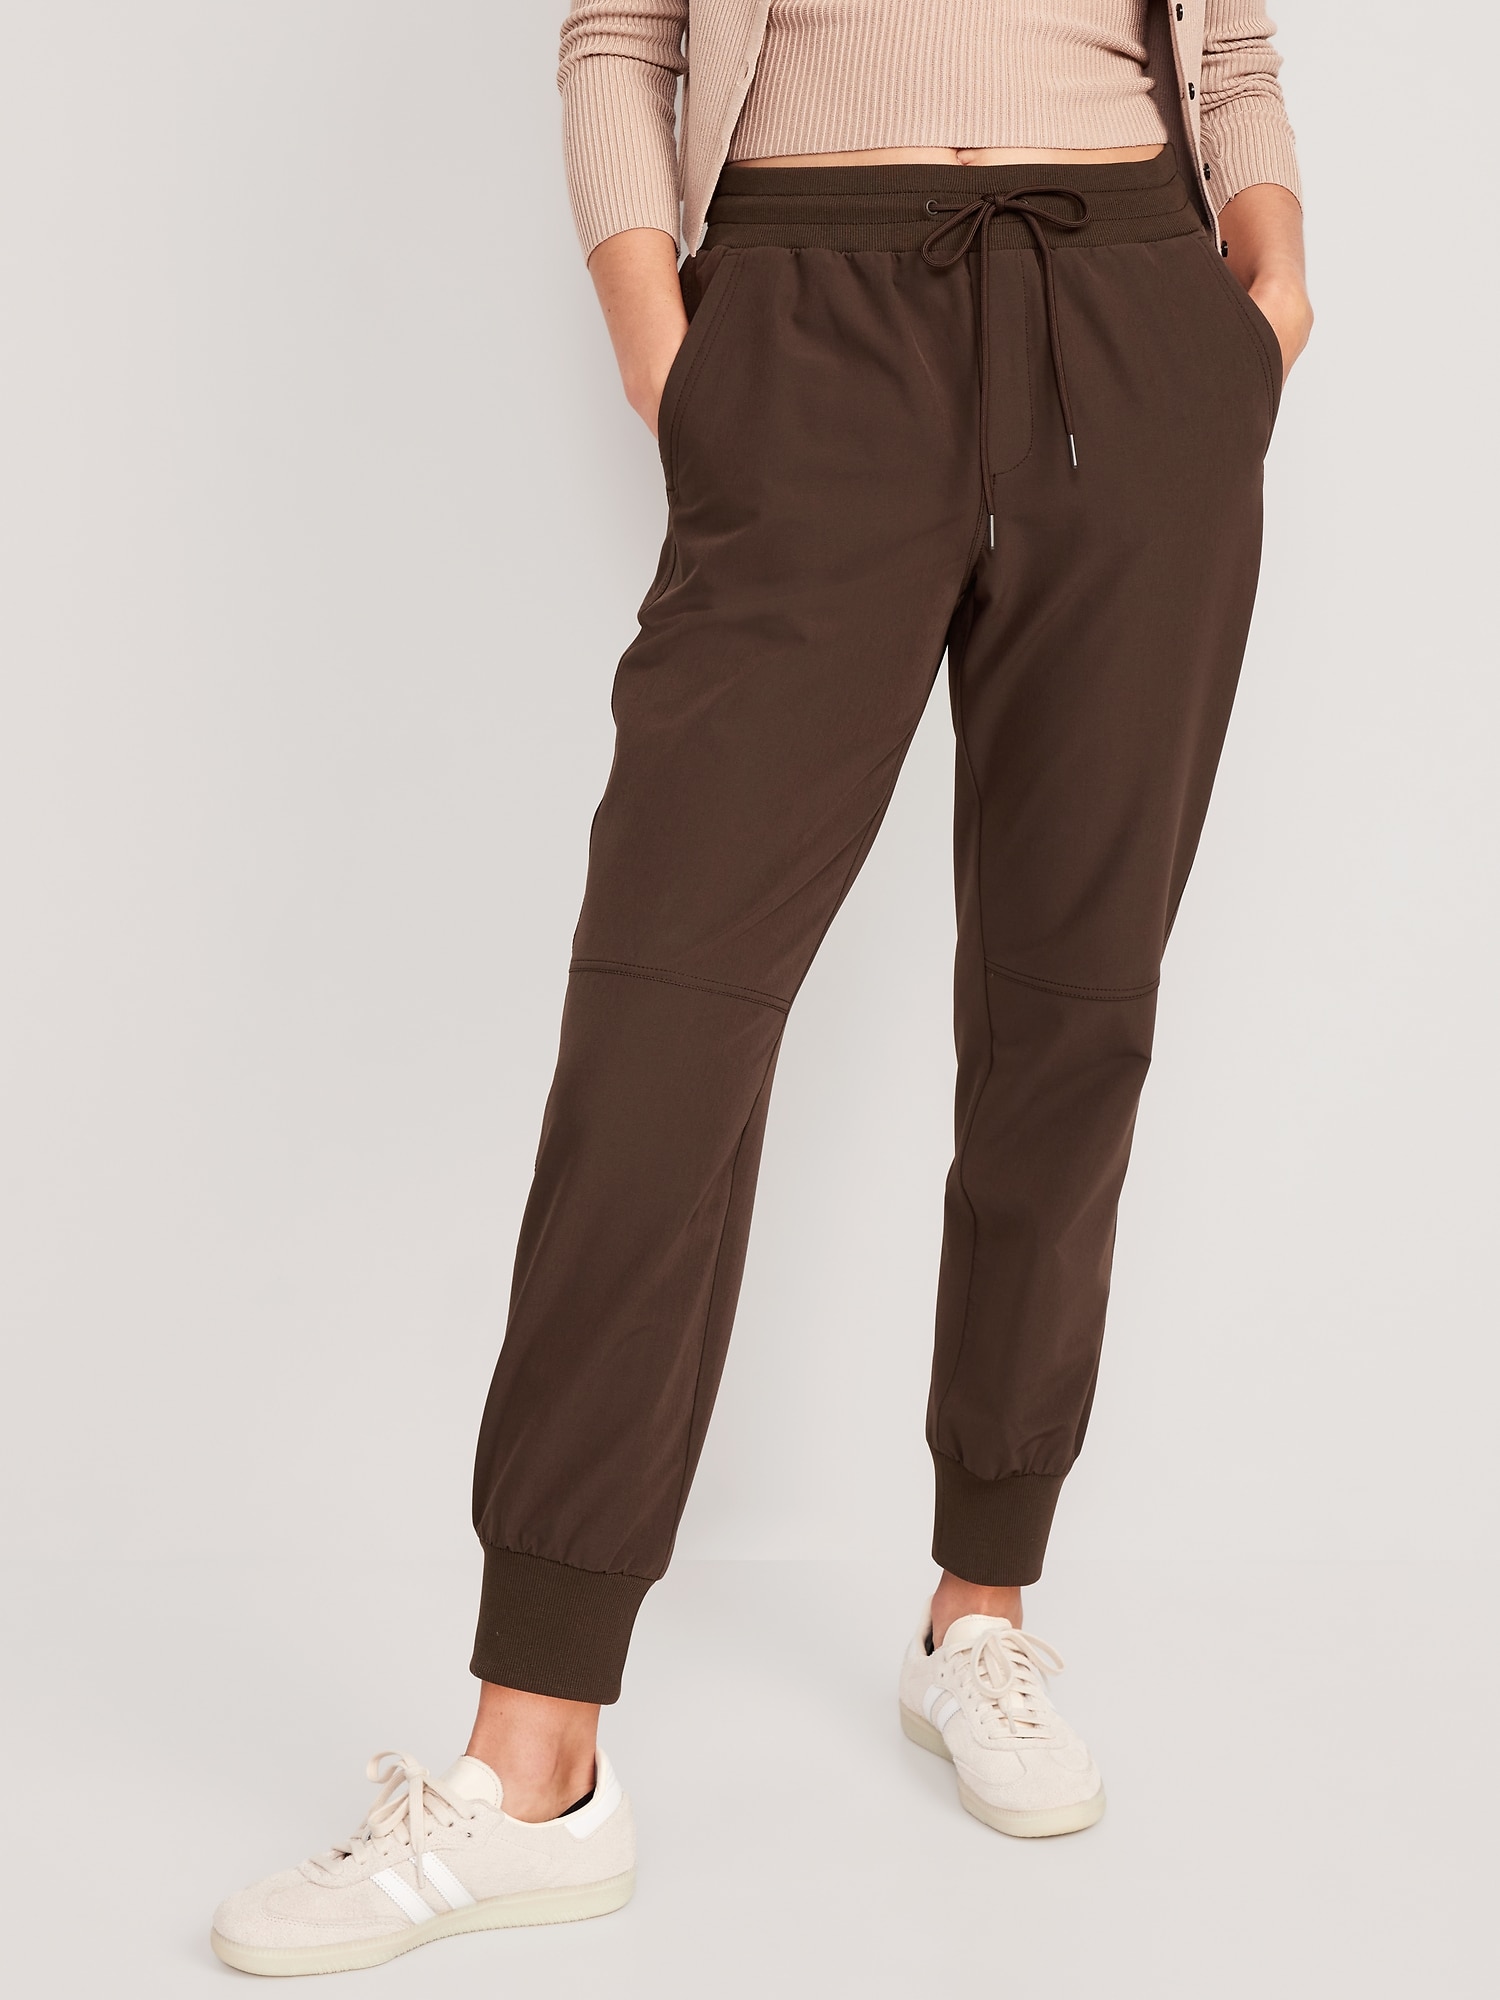 Old Navy High-Waisted All-Seasons StretchTech Water-Repellent Jogger Pants  for Women